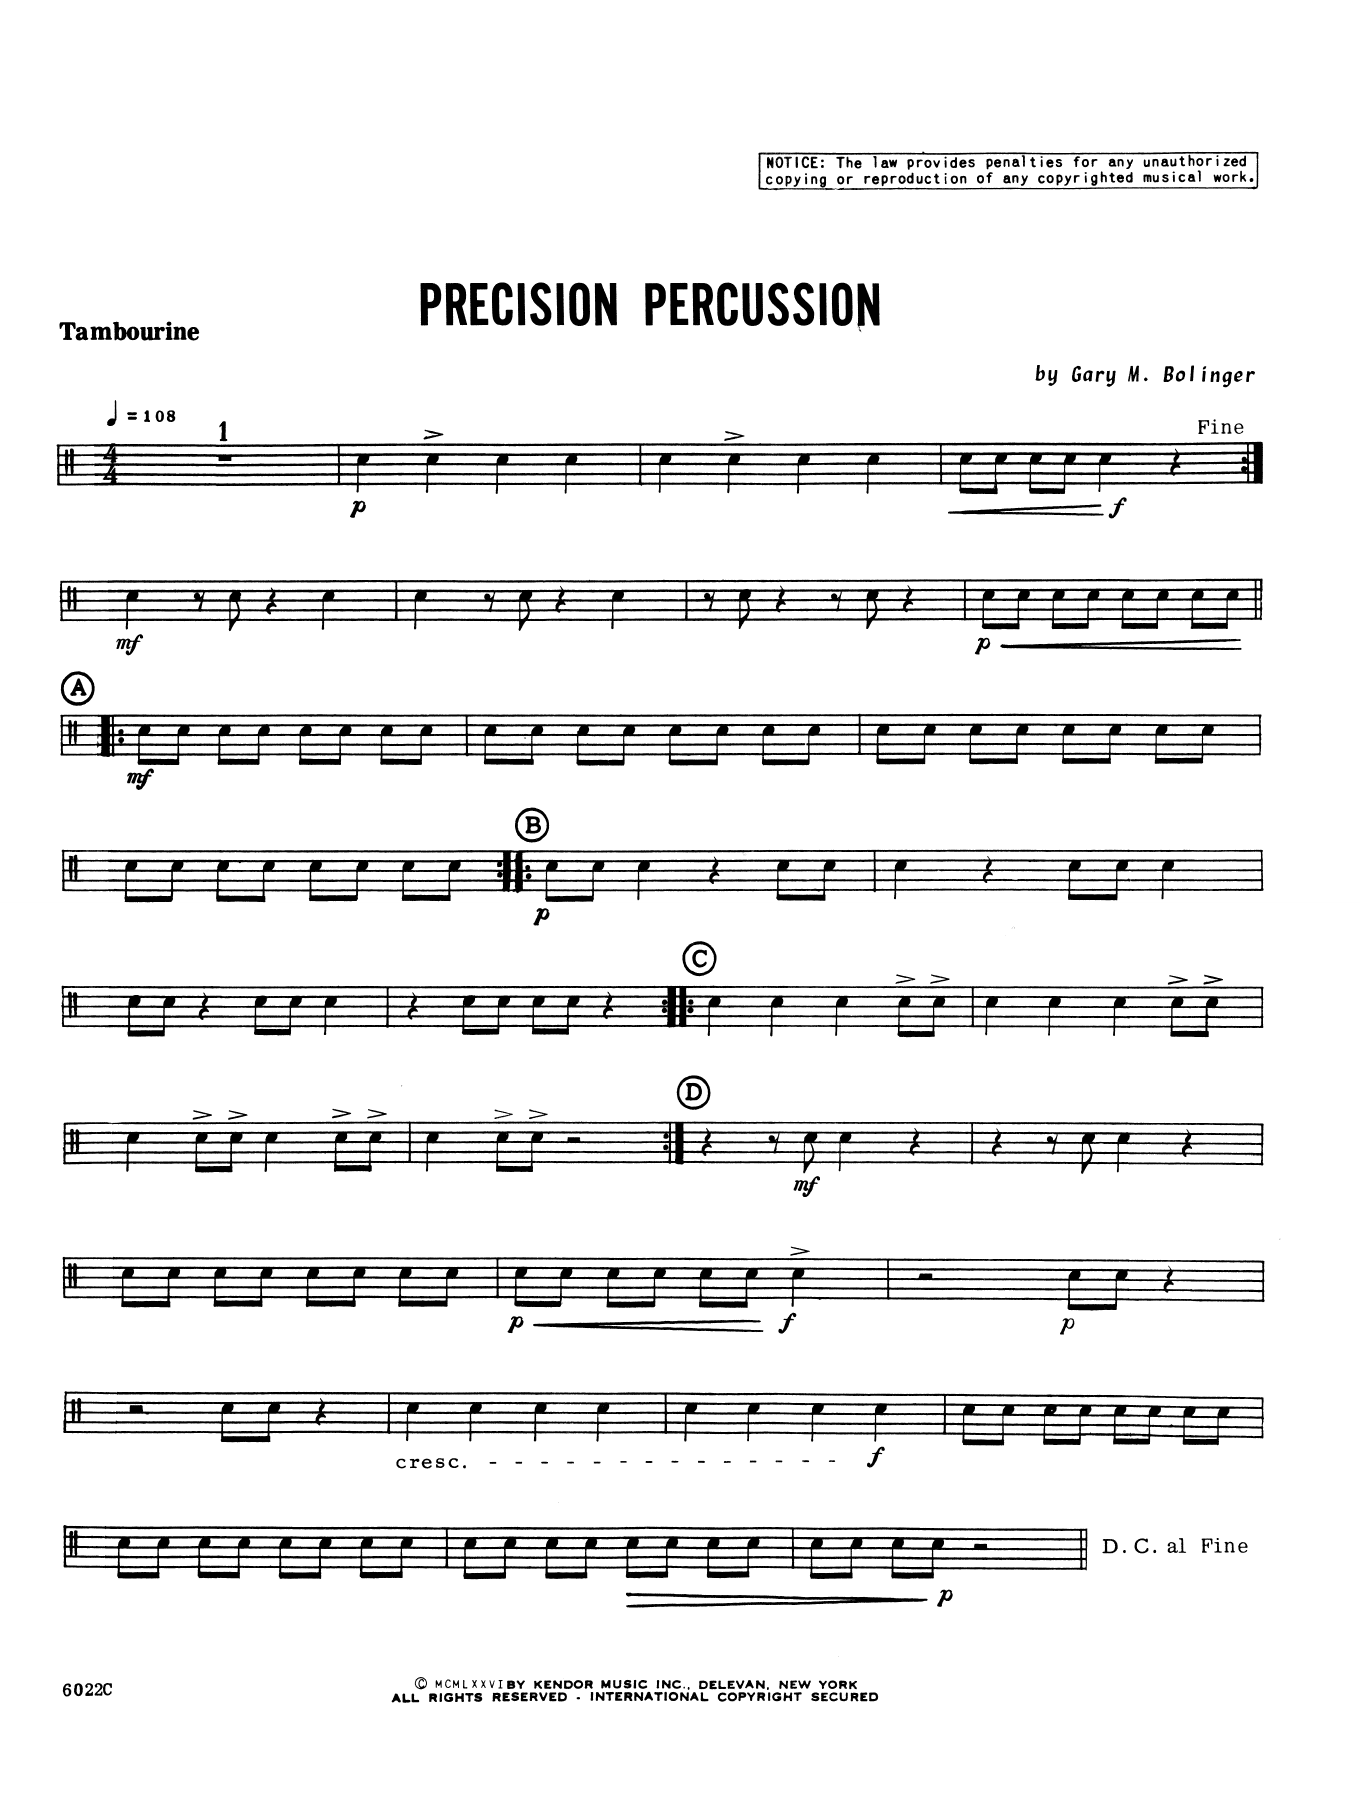 Gary M. Bolinger Precision Percussion - Percussion 3 sheet music notes and chords. Download Printable PDF.